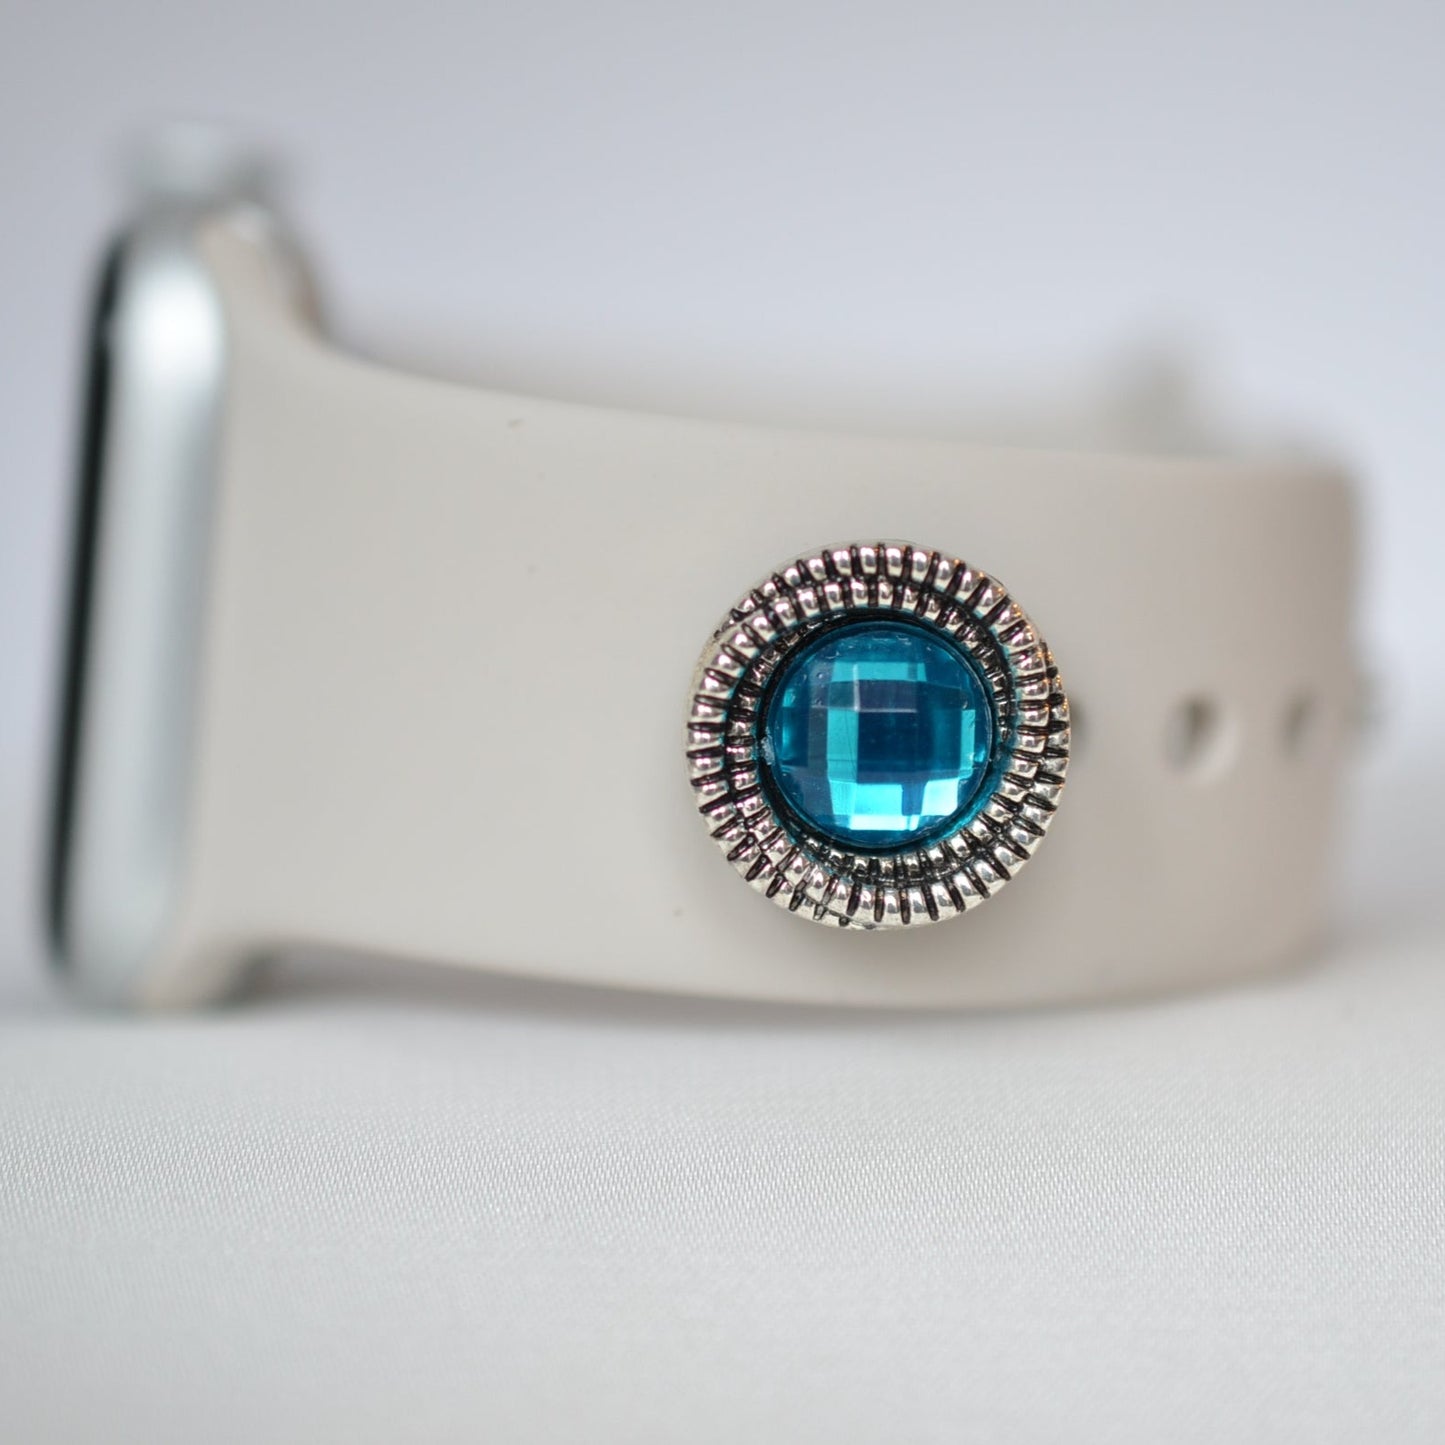 Turquoise Charm for Belt, Bag and Watch Bands